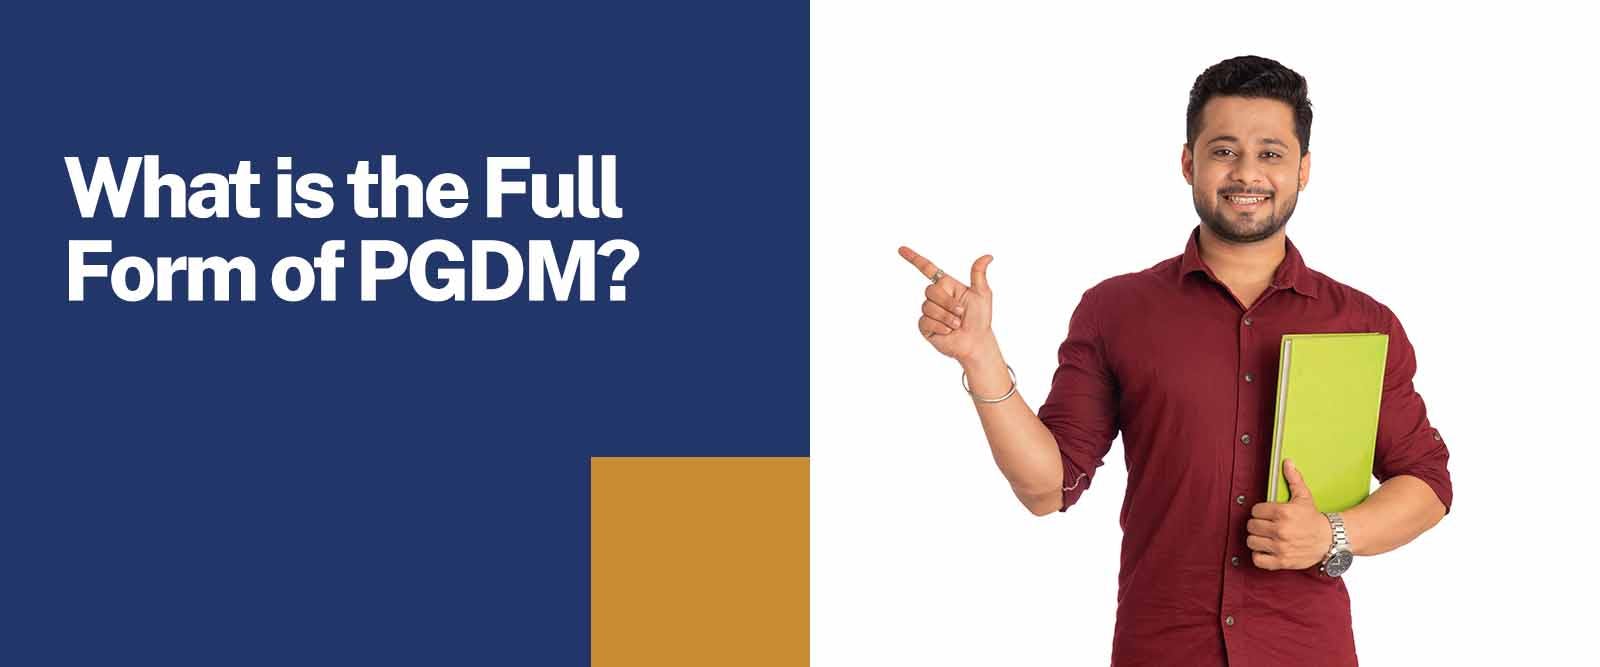 What is the Full Form of PGDM?